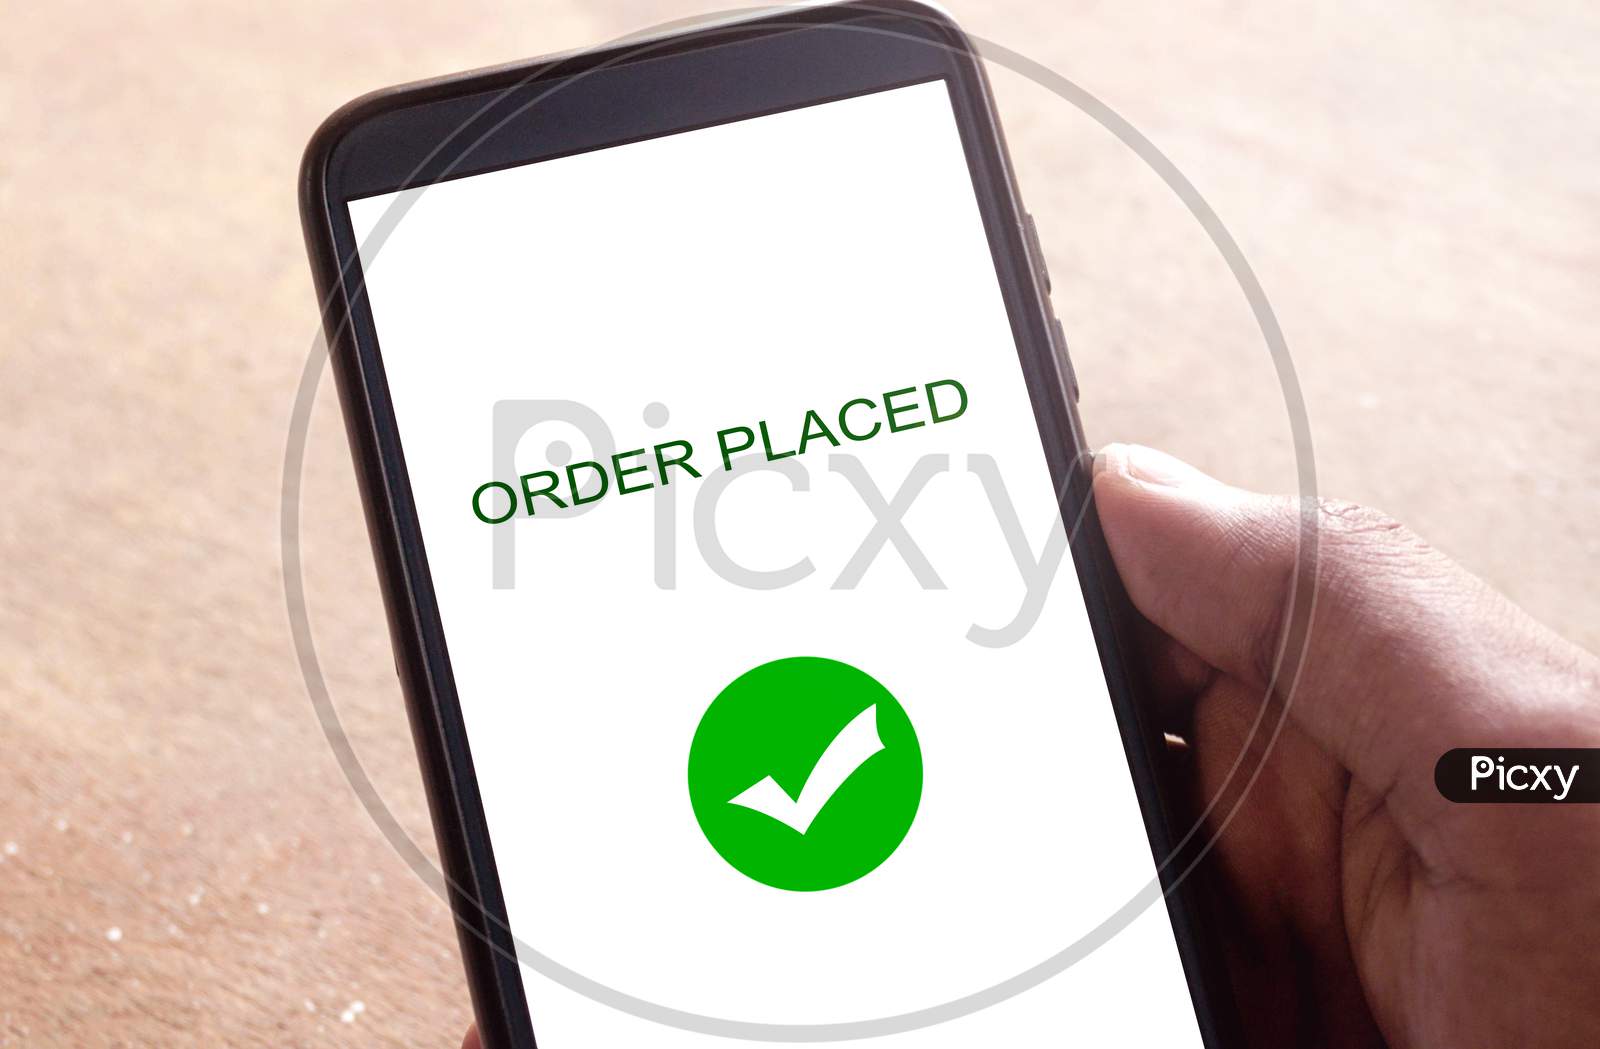 Order placed on a smartphone, hand holding smartphone